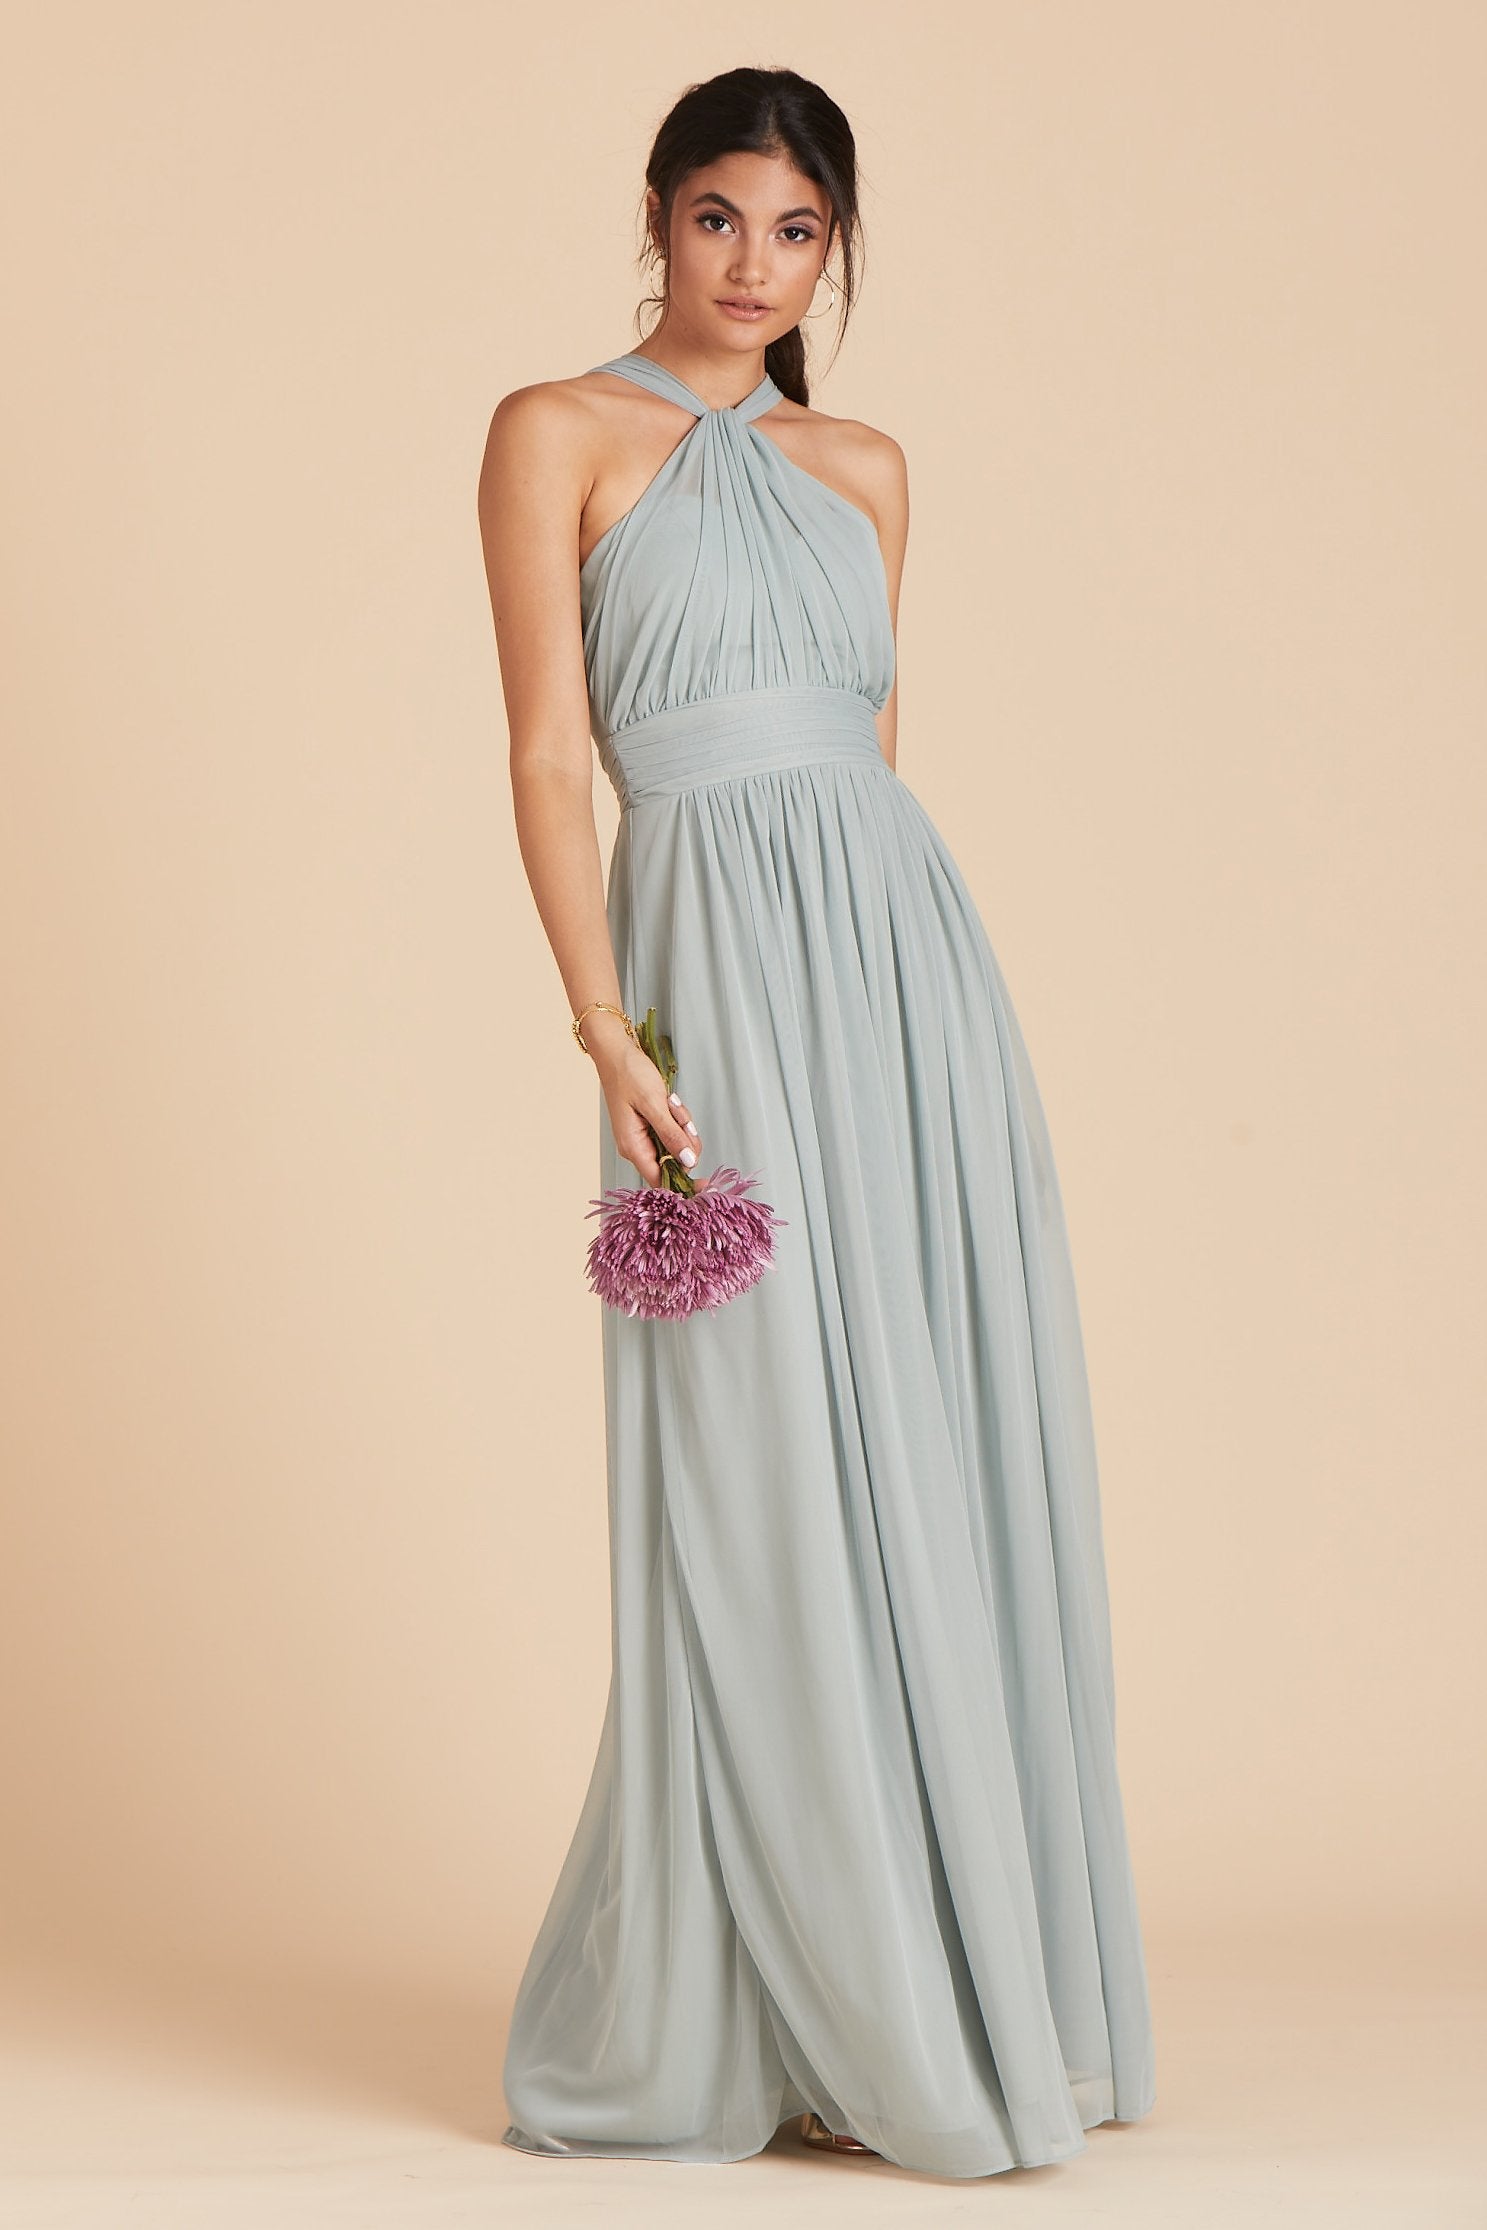 Bridesmaid Dresses Starting From $99